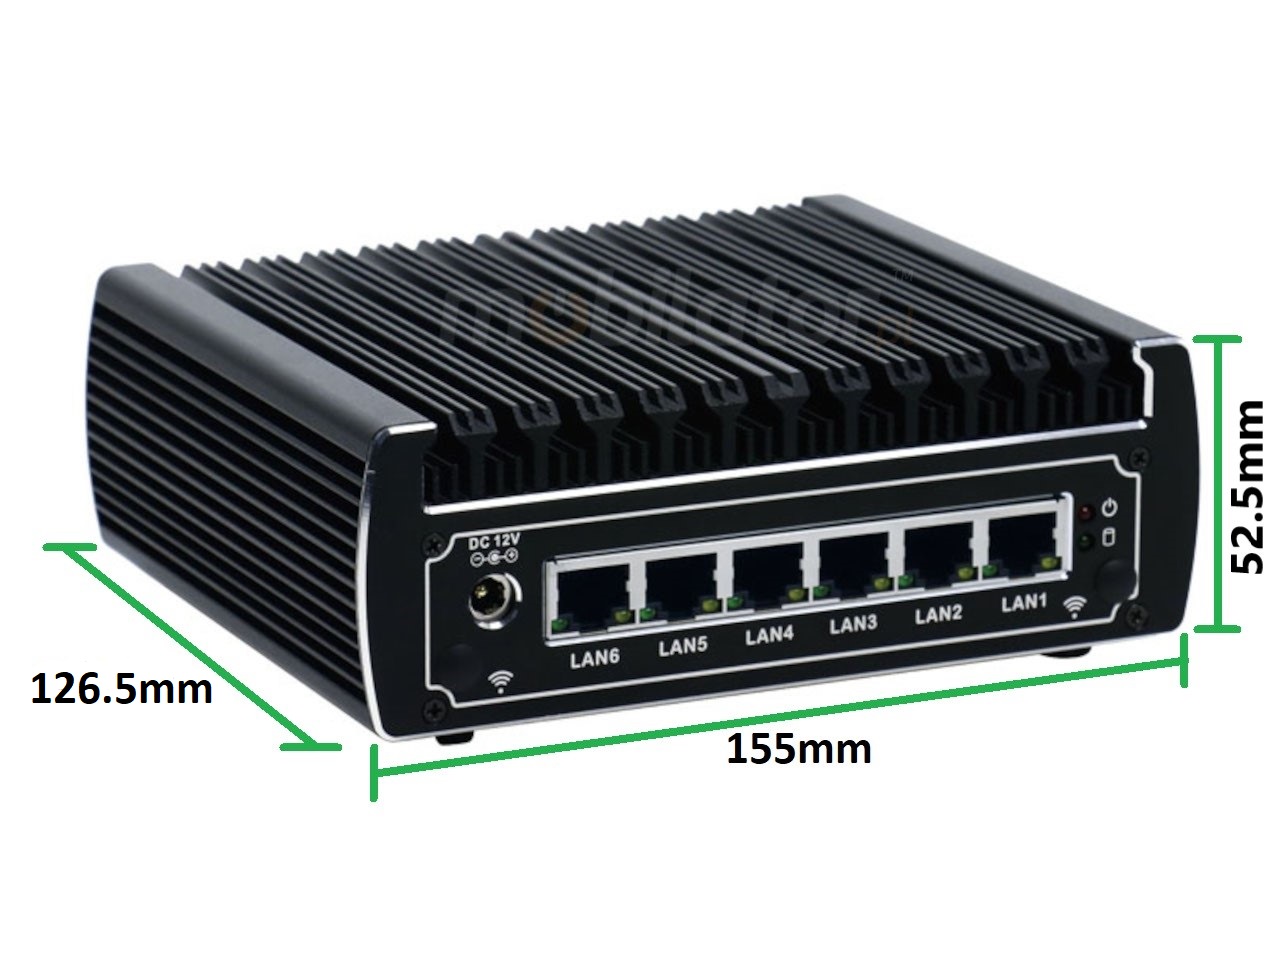  IBOX N133 v.3, size, industrial small fast reliable intel fanless industrial small LAN INTEL i3 SSD DDR4